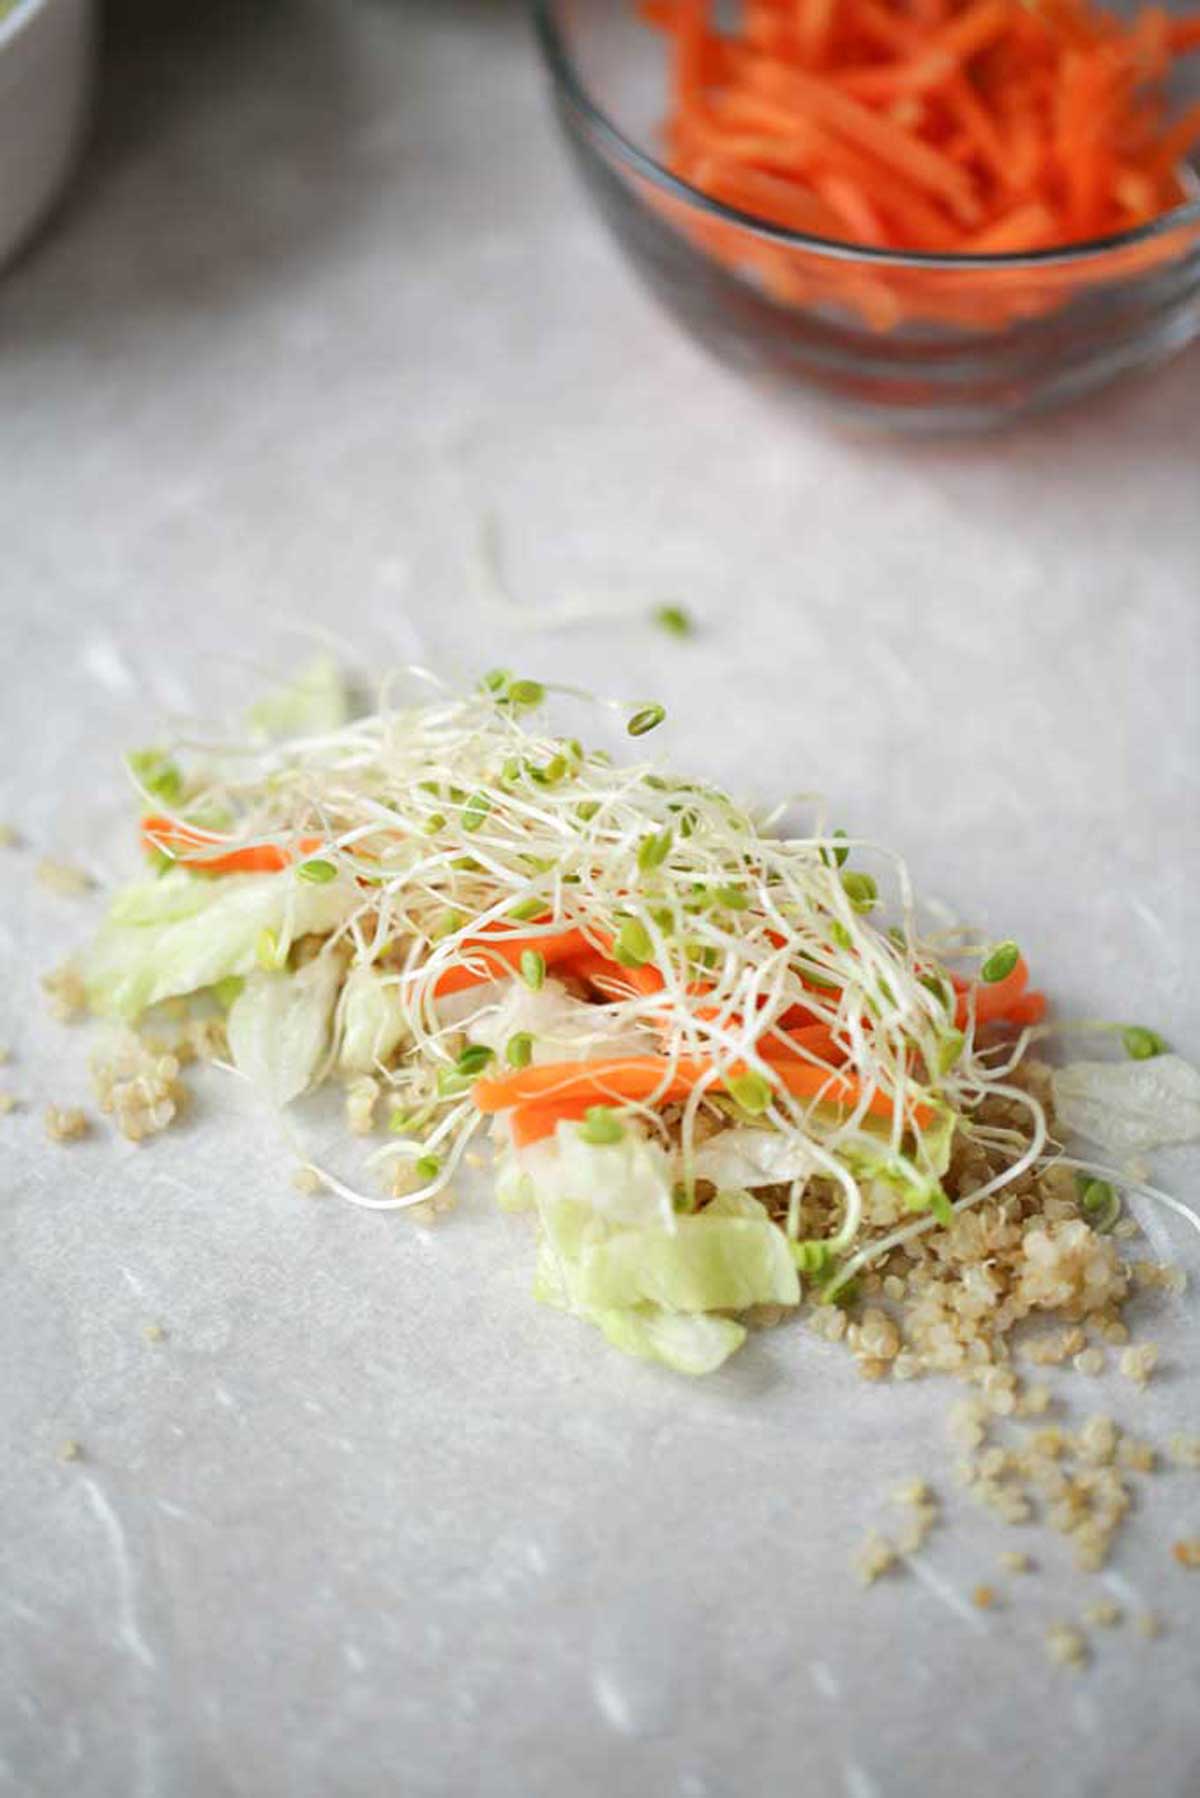 Photo of a summer roll wrapper with quinoa and veggies on top.